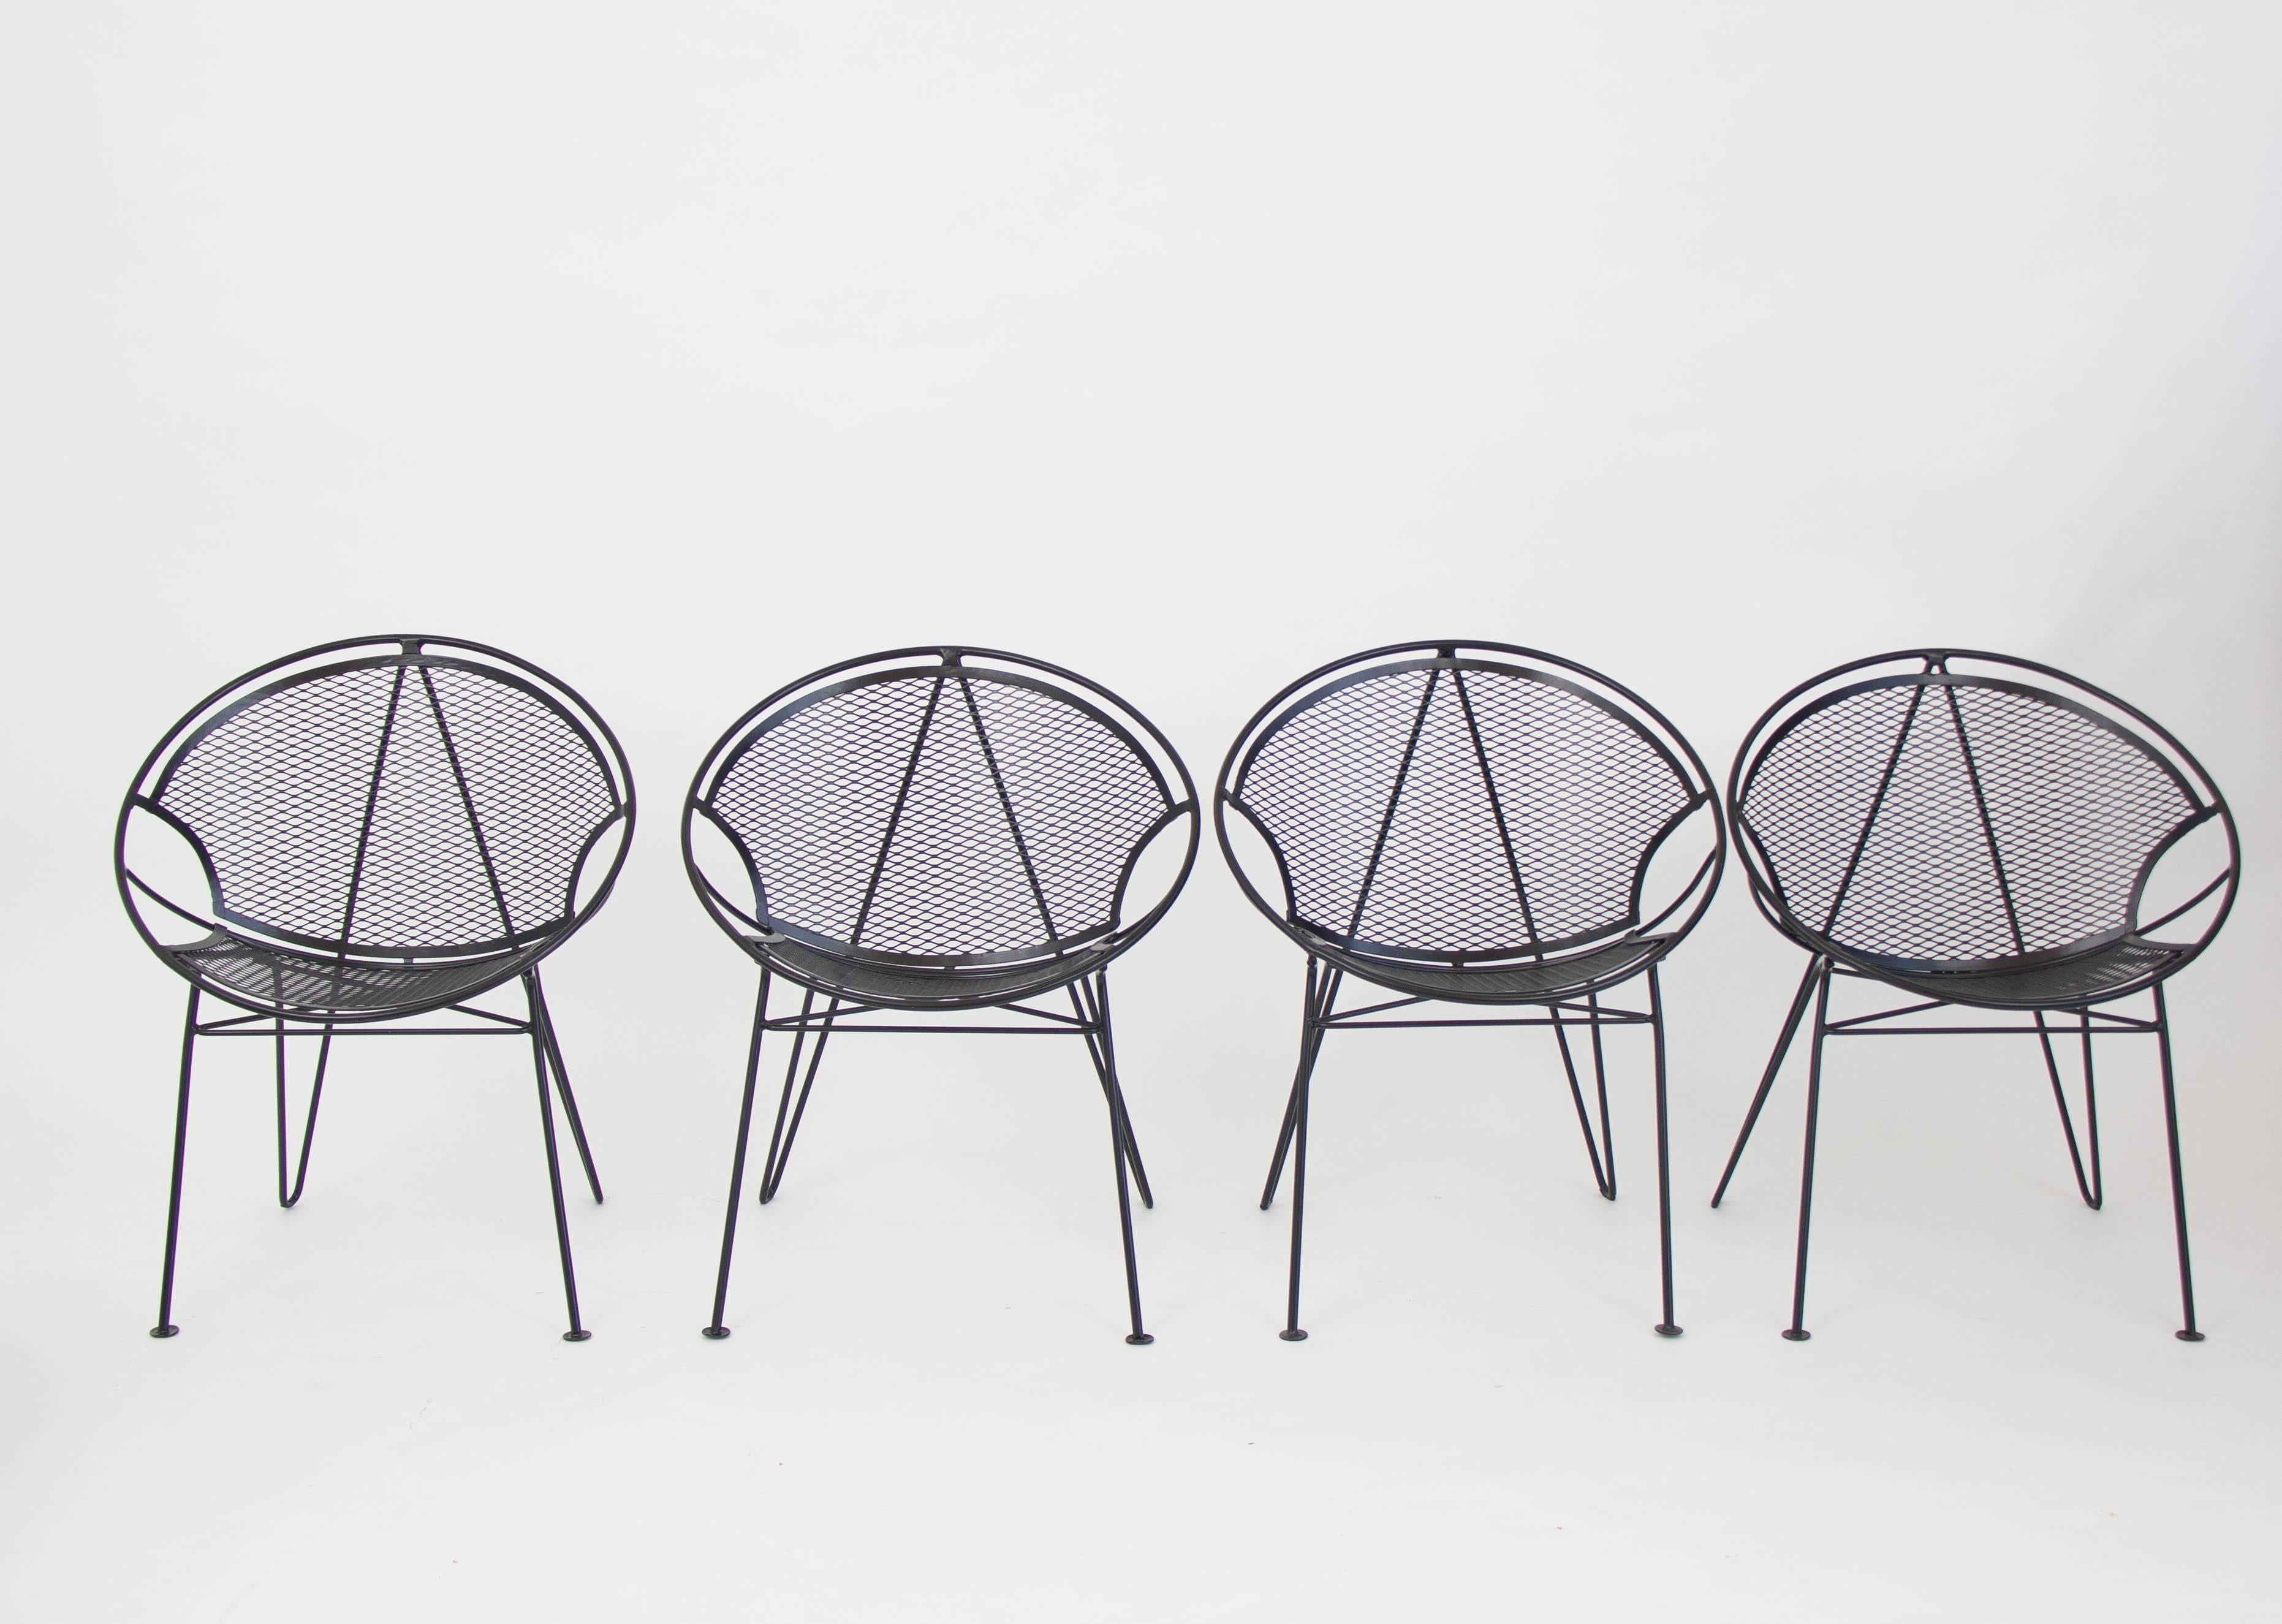 A four-person wrought iron patio dining set from Maurizio Tempestini's “Radar” collection for John Salterini. The chairs have a bisected hoop construction with a delicate grid of wrought iron forming the body, and sit on four angled legs with flat